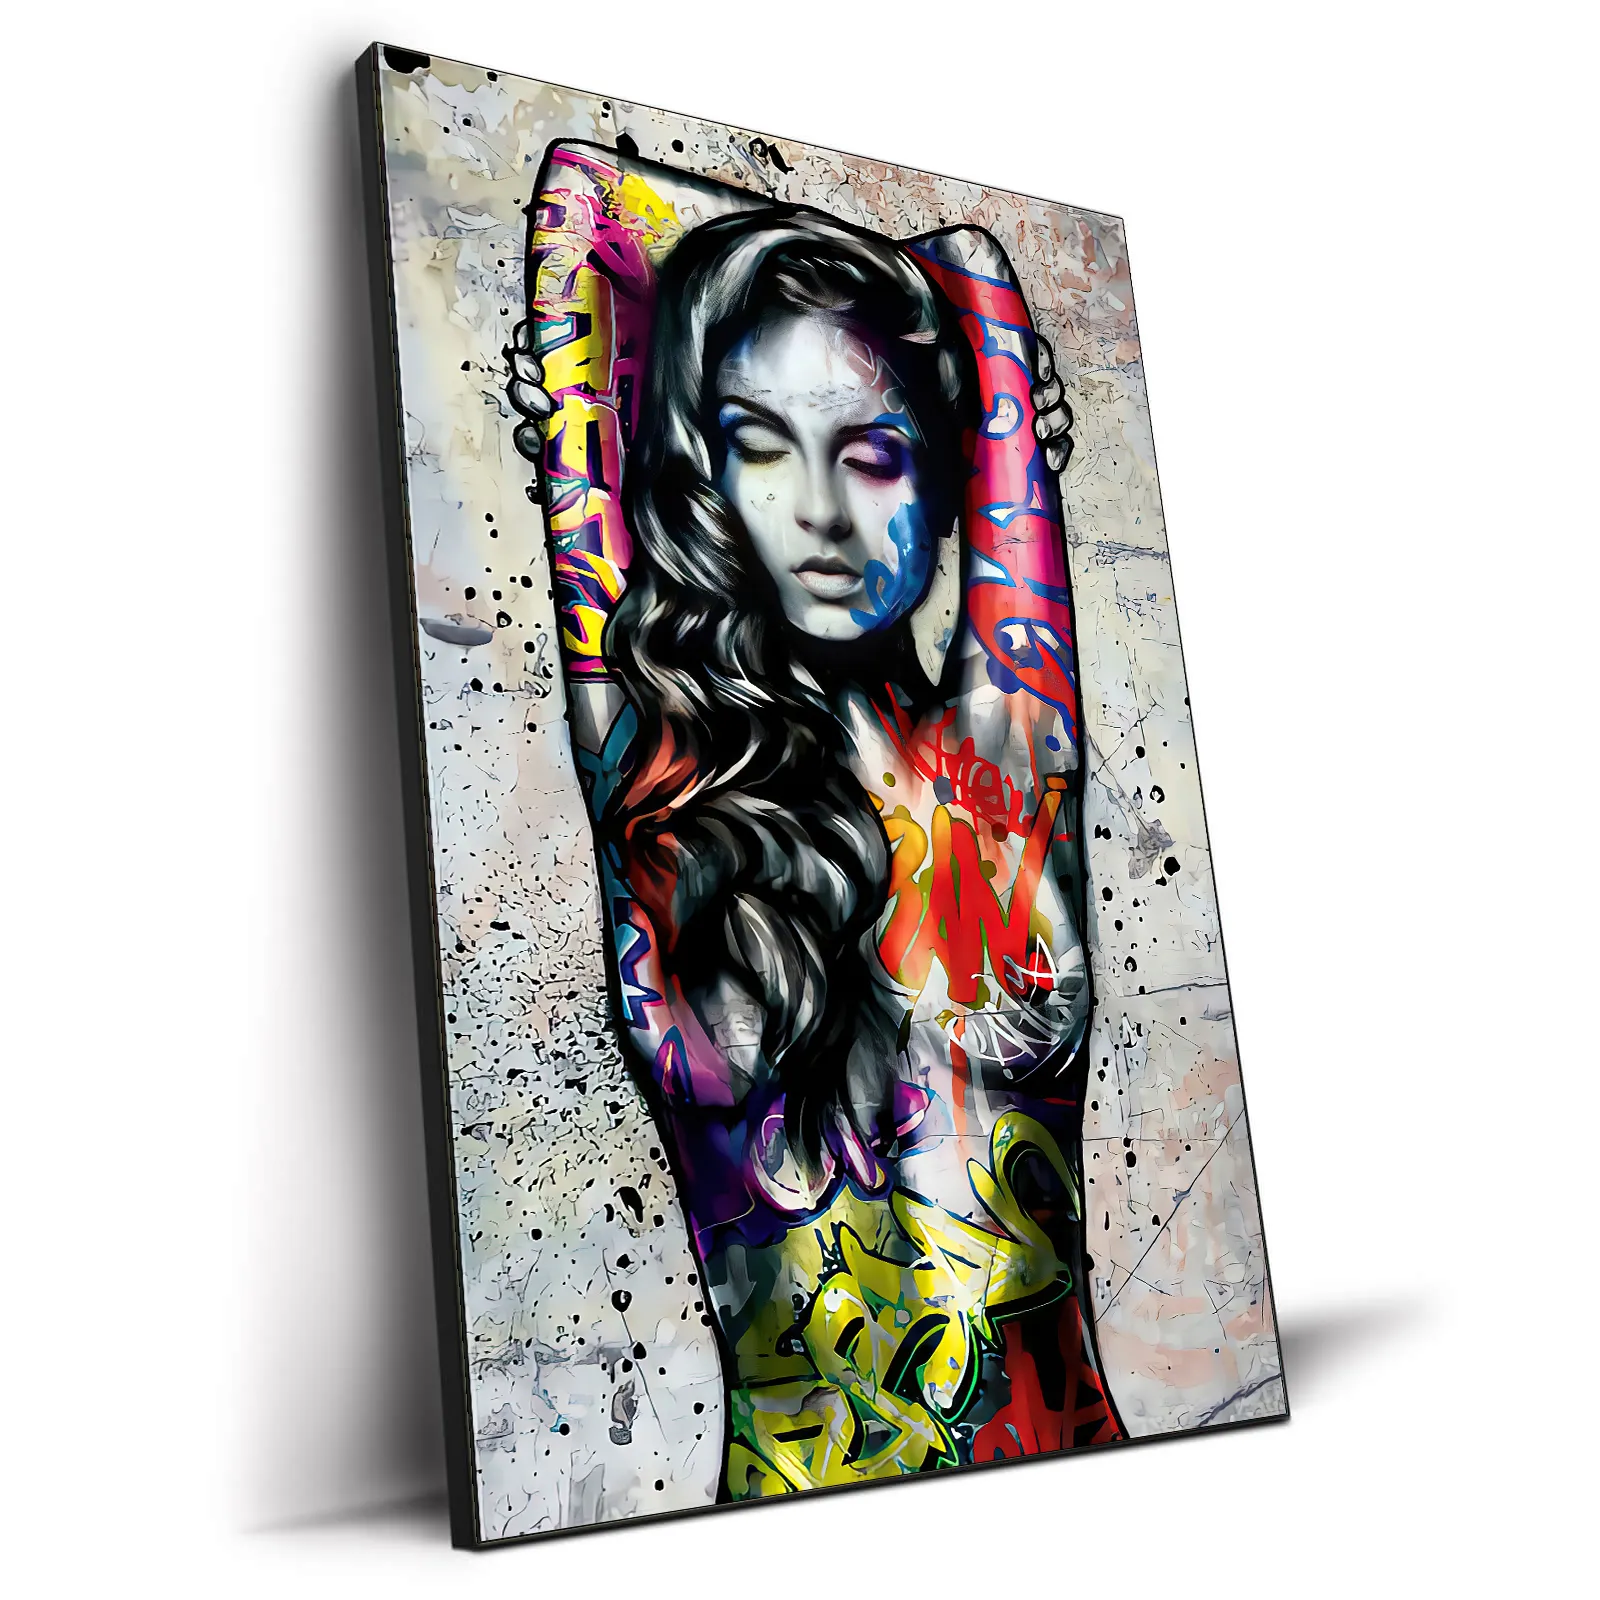 Living Room Street Pop Art Picture Canvas Prints Poster Graffiti Art for Wall Decoration